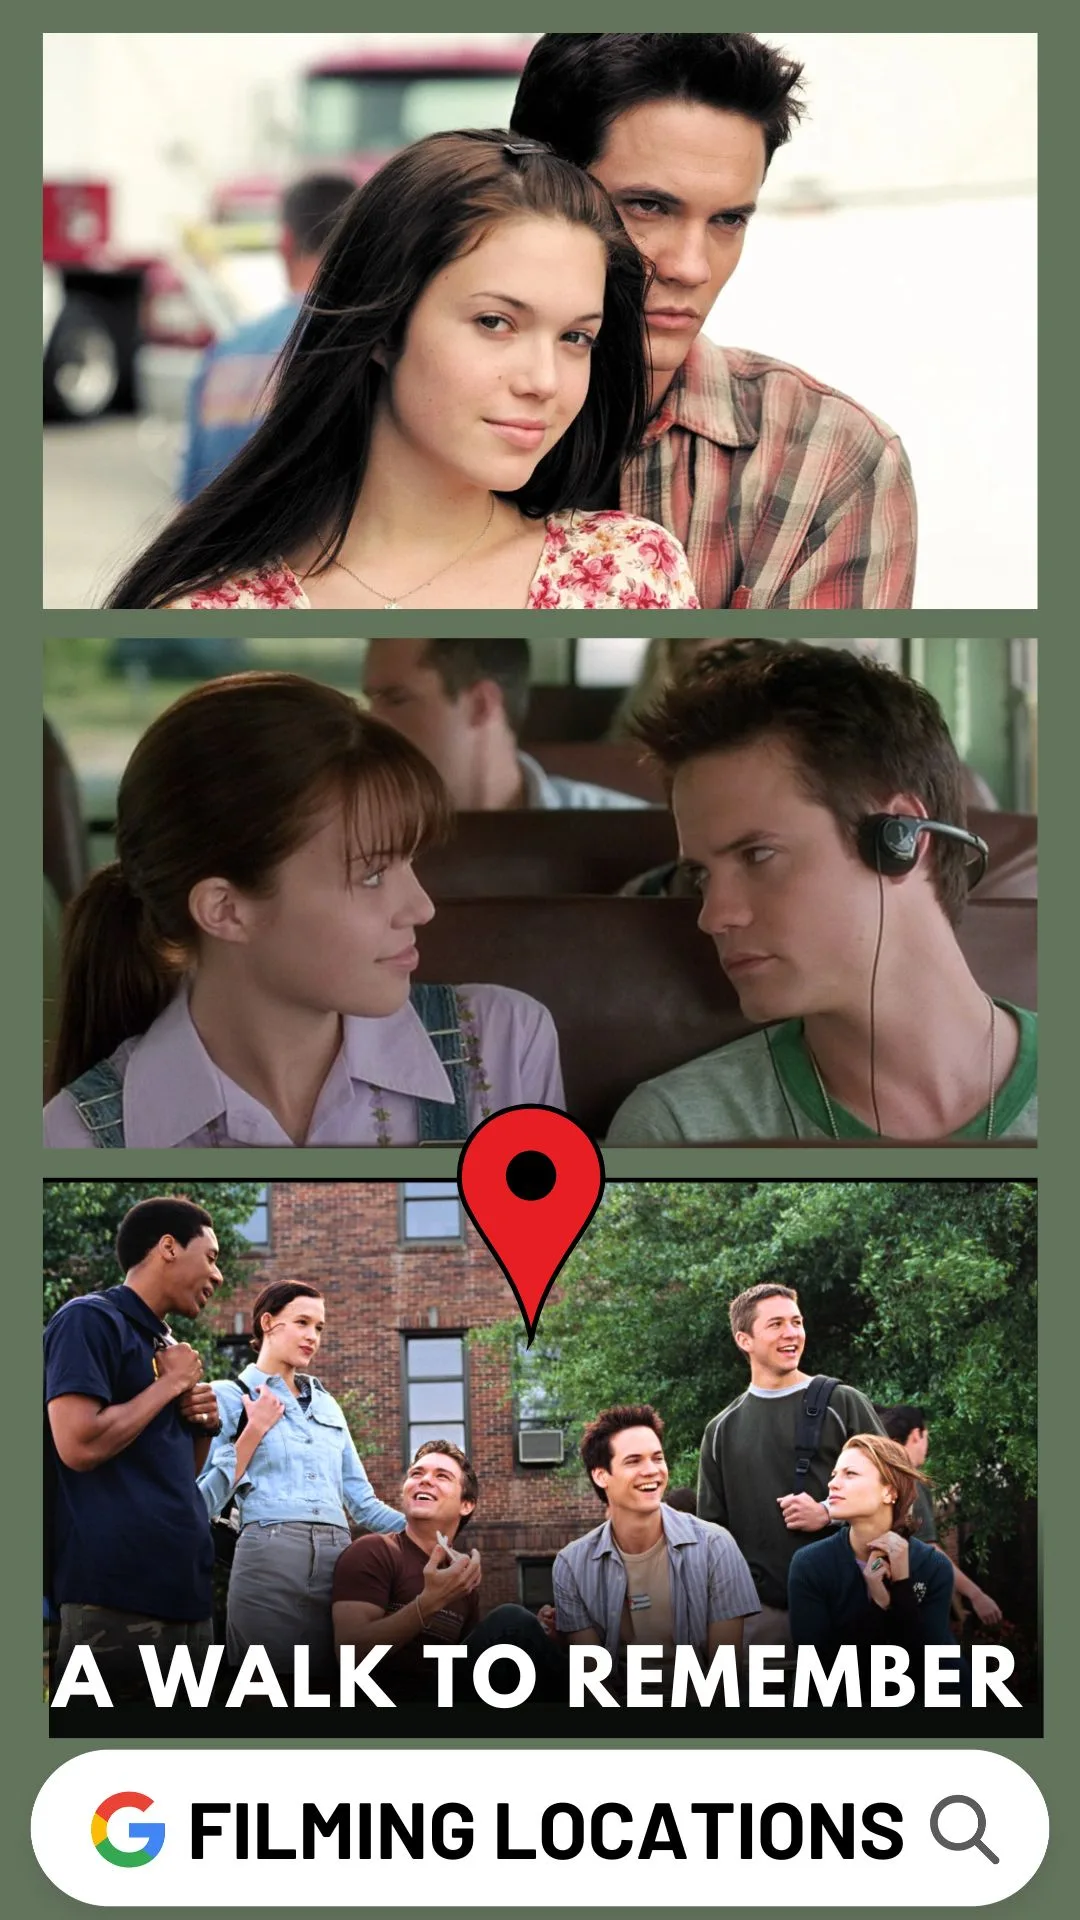 A Walk To Remember Filming Locations